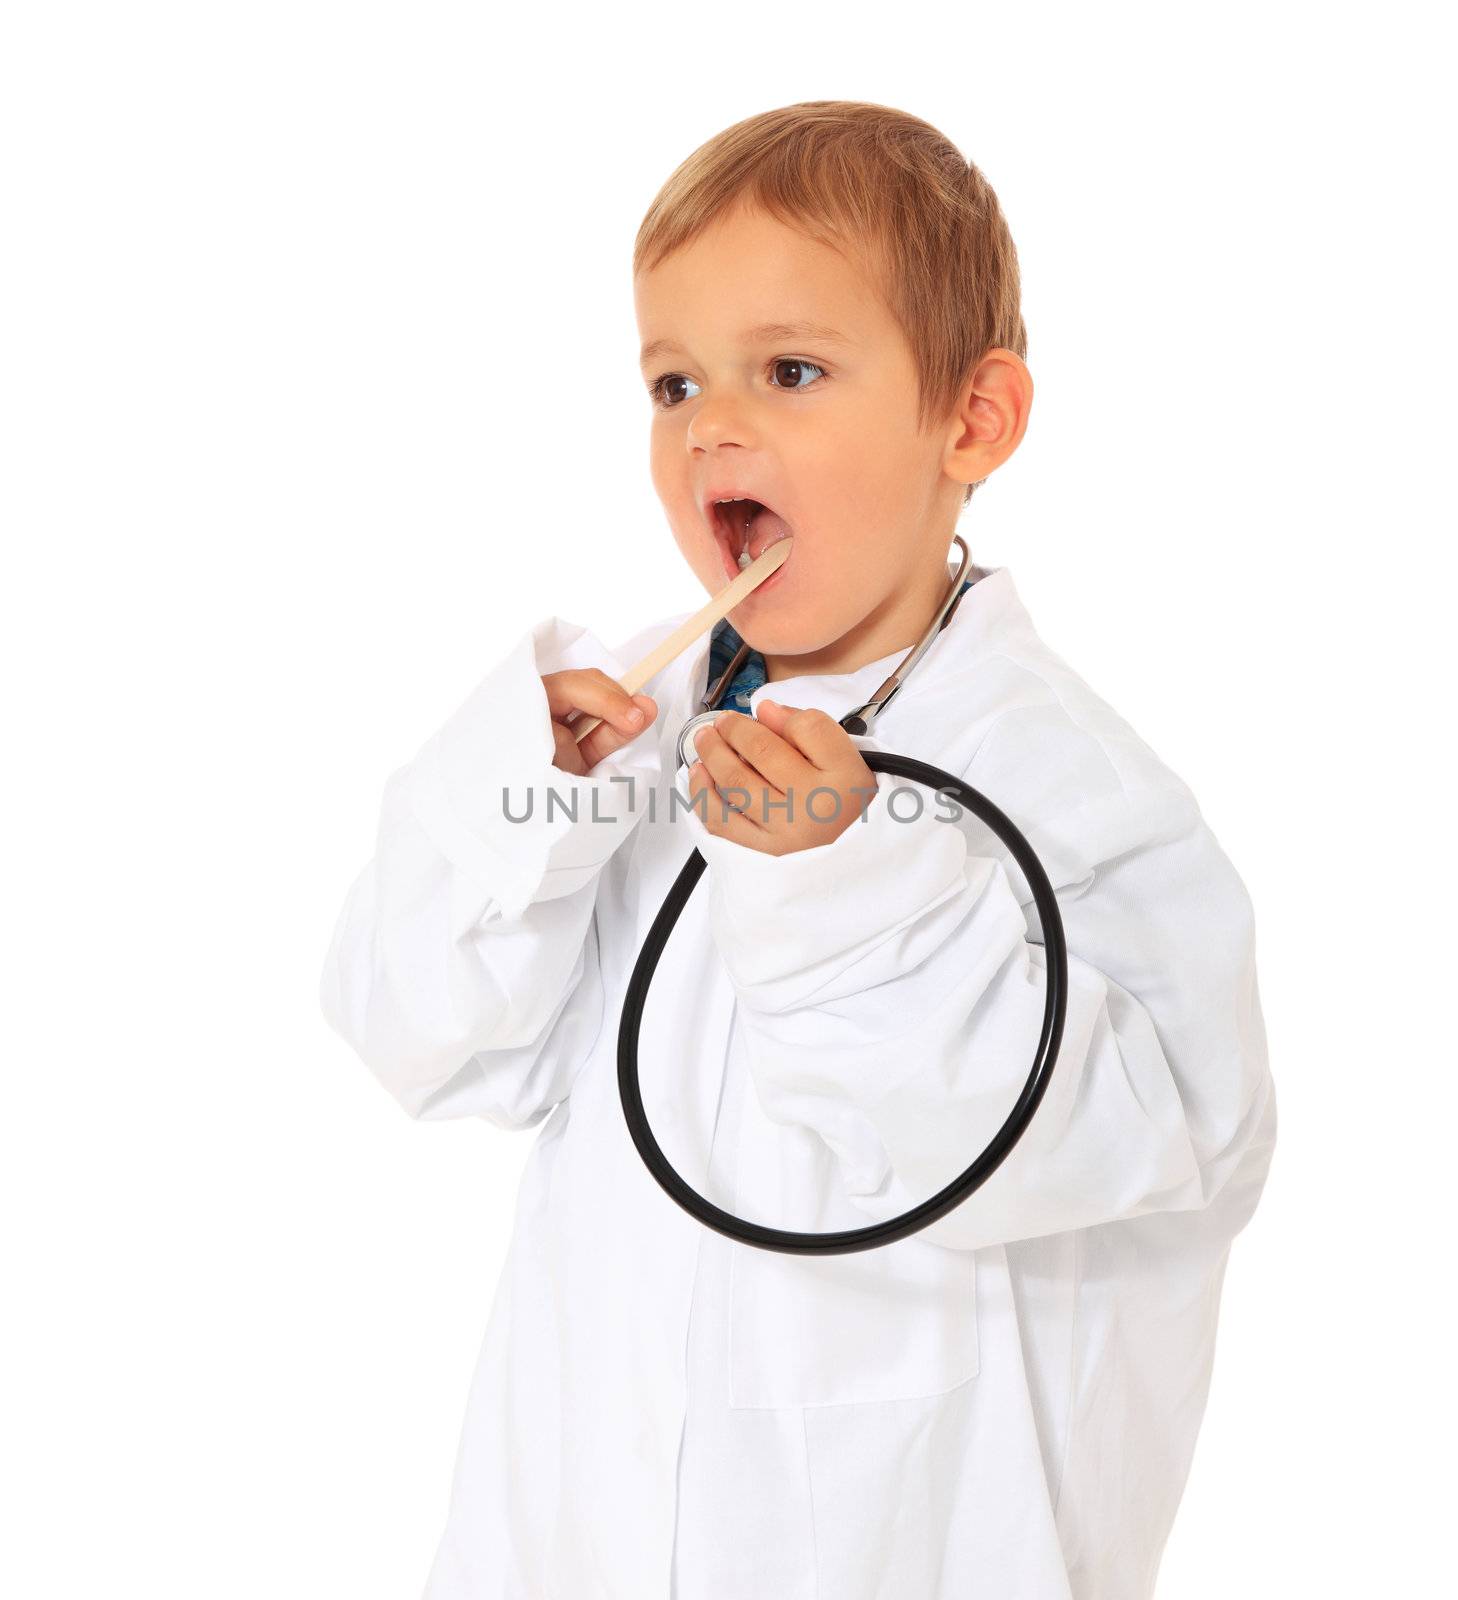 Cute caucasian boy playing doctor. All on white background.